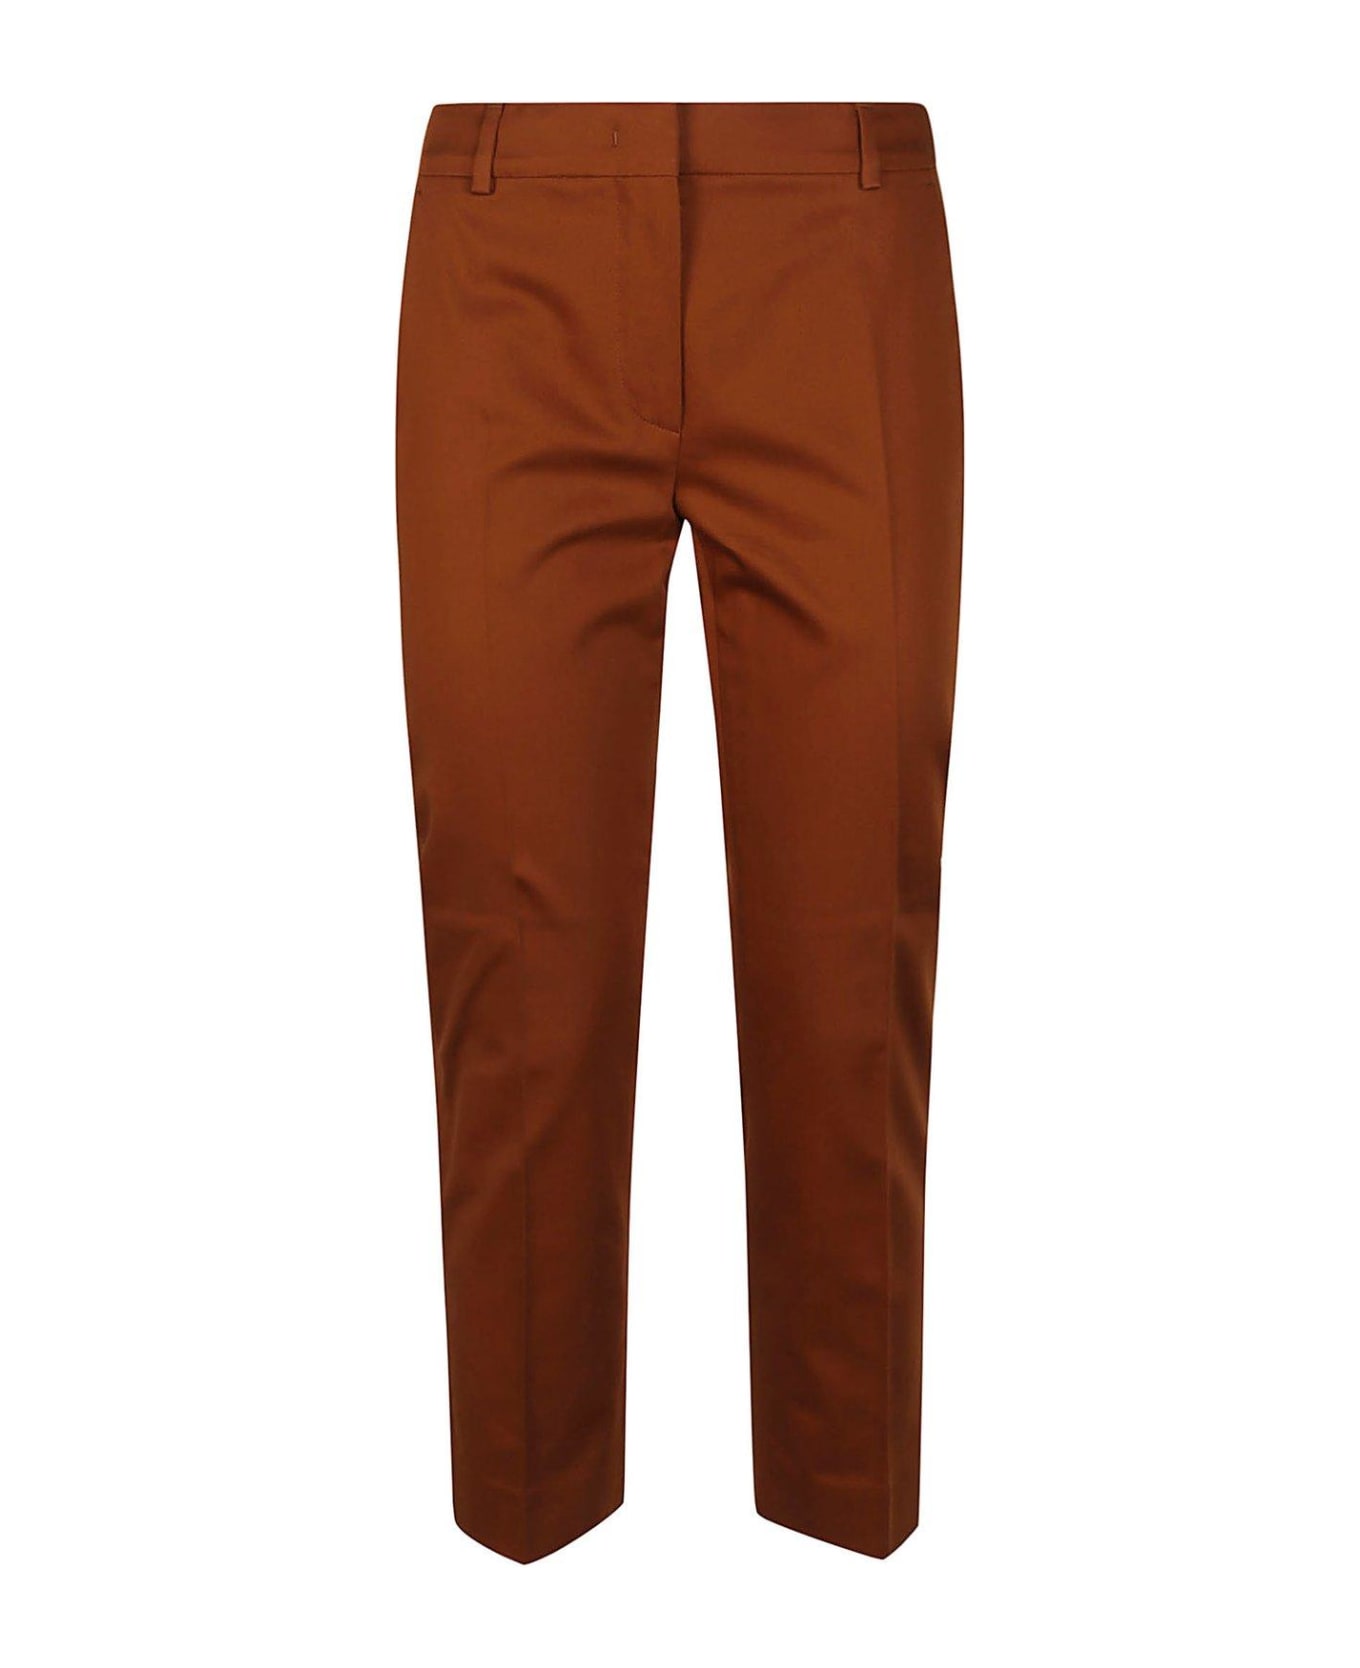 Max Mara Tapered Cropped Trousers - Cuoio Scuro ボトムス